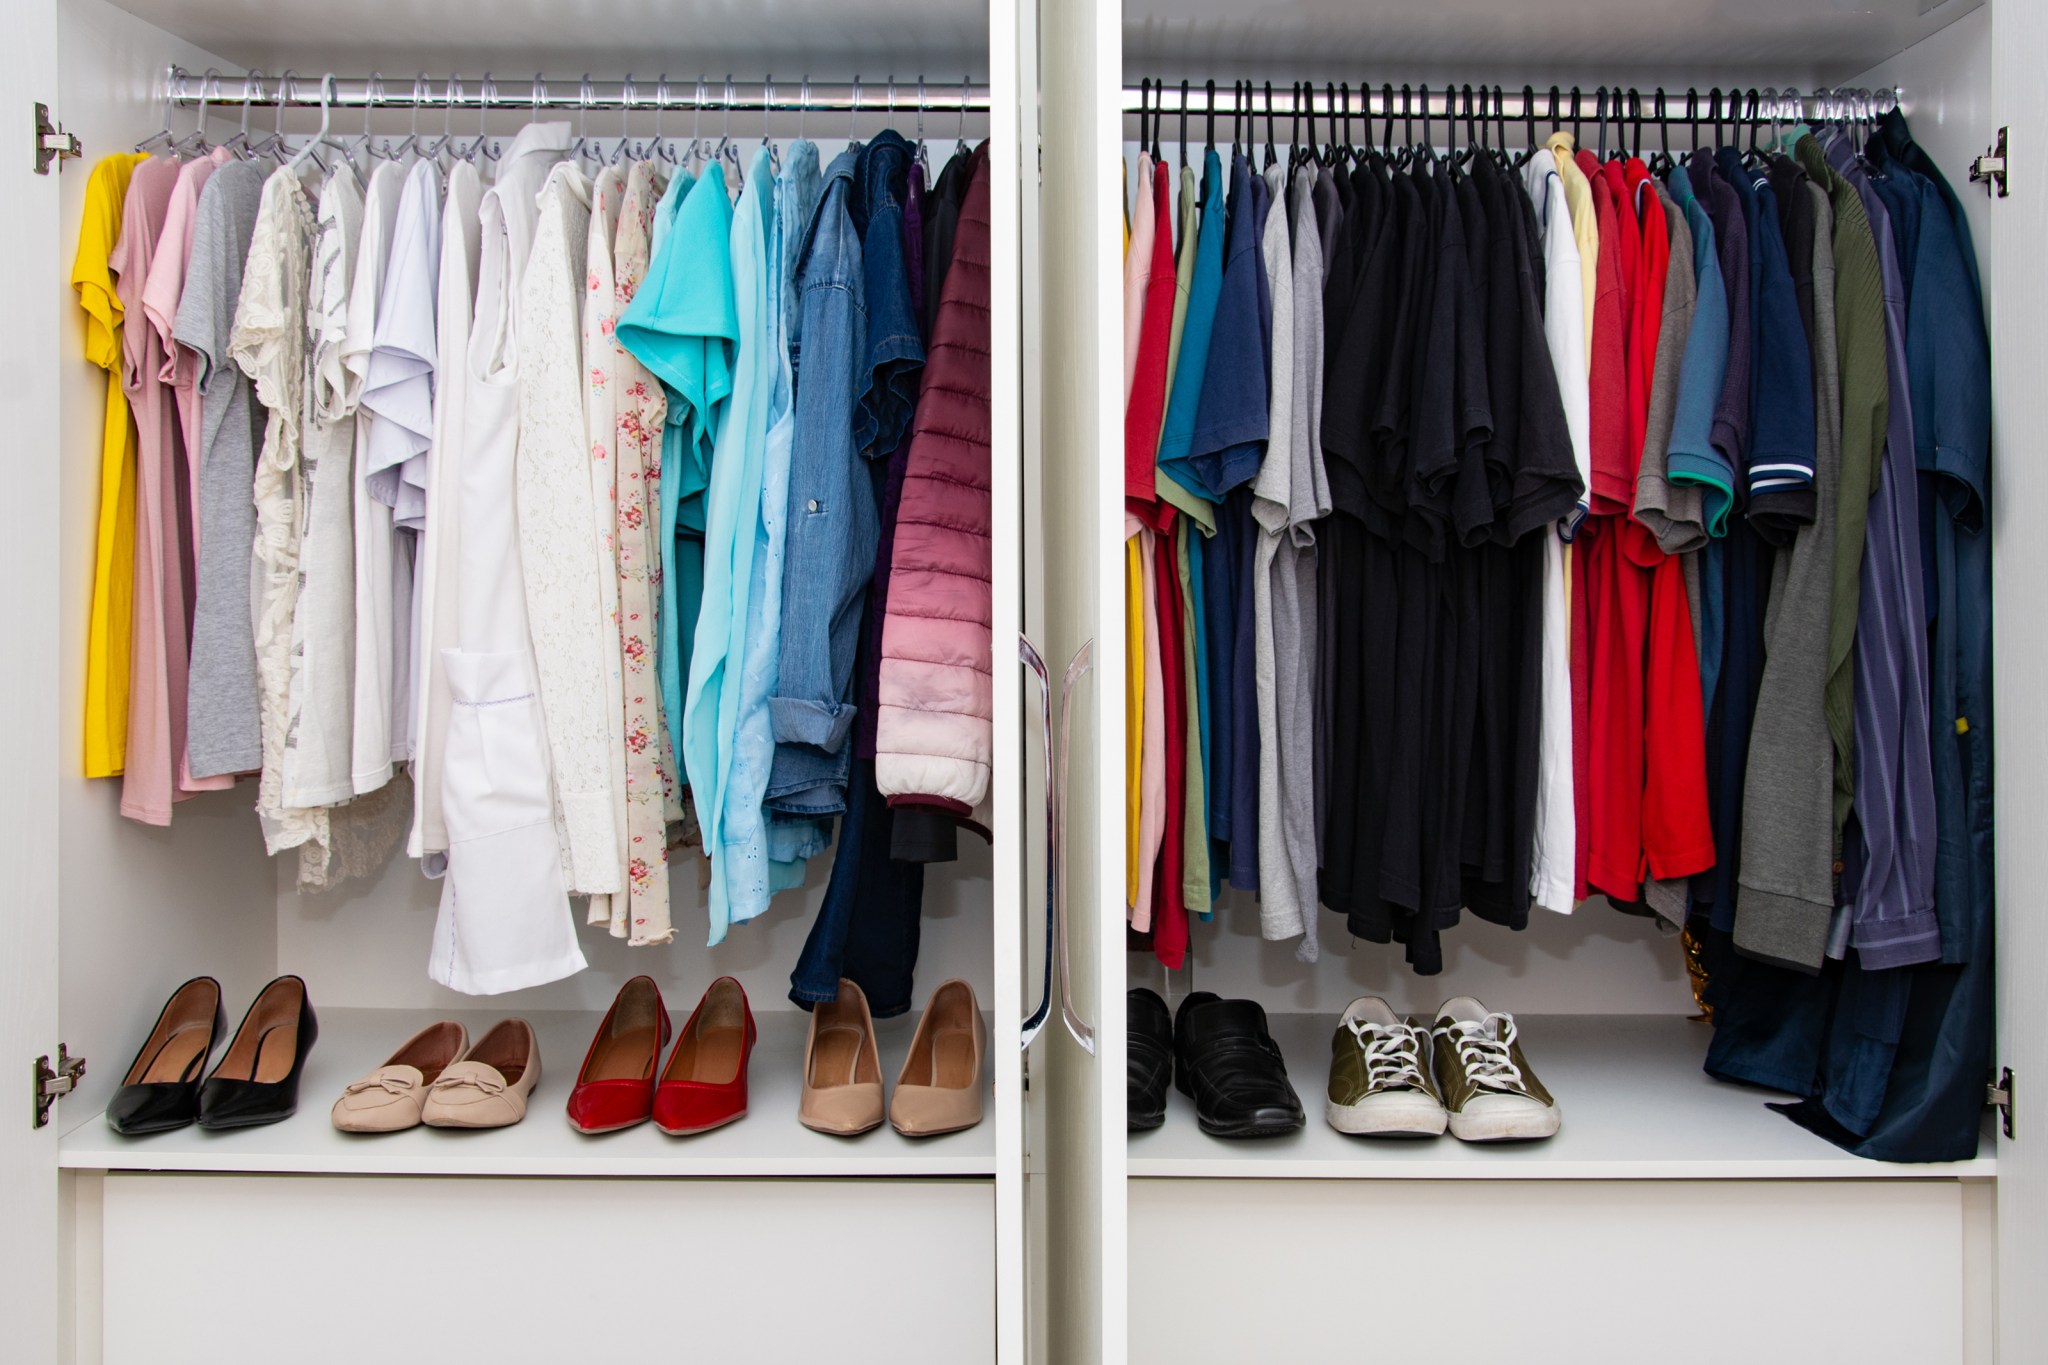 Hangers for clothes: Top choices for keeping clothes organized